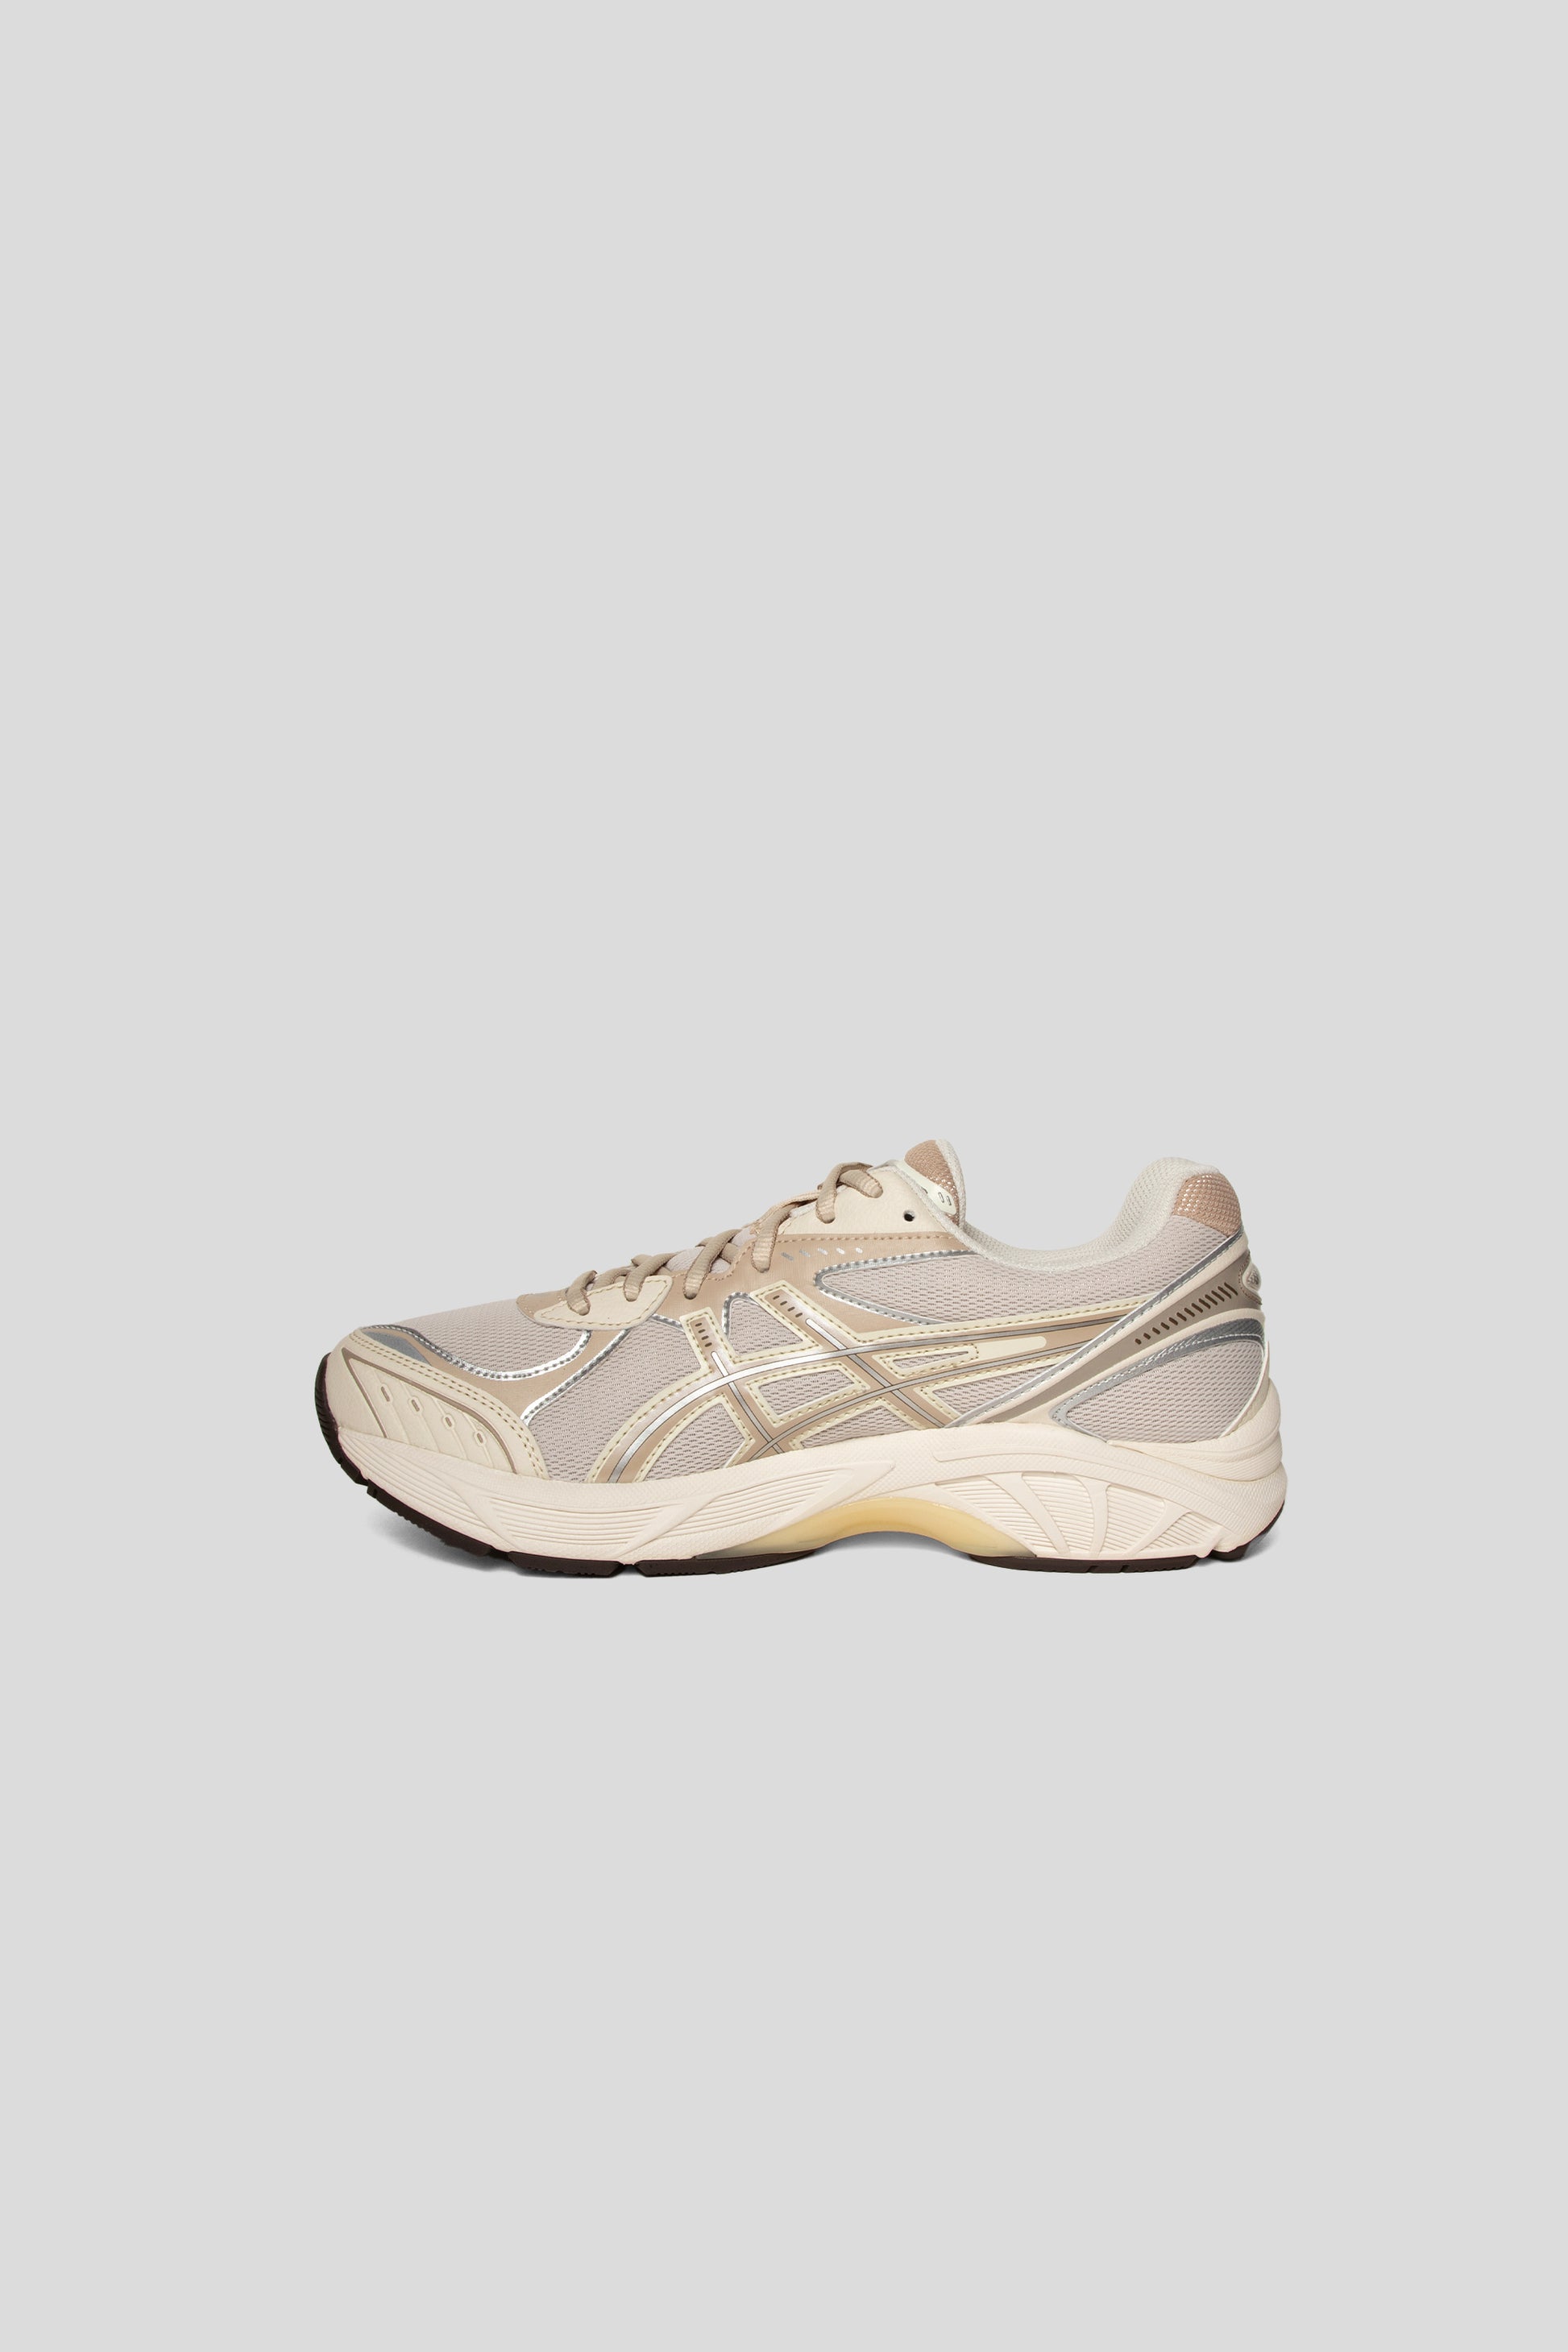 Asics GT-2160 in Oatmeal/Simply Taupe